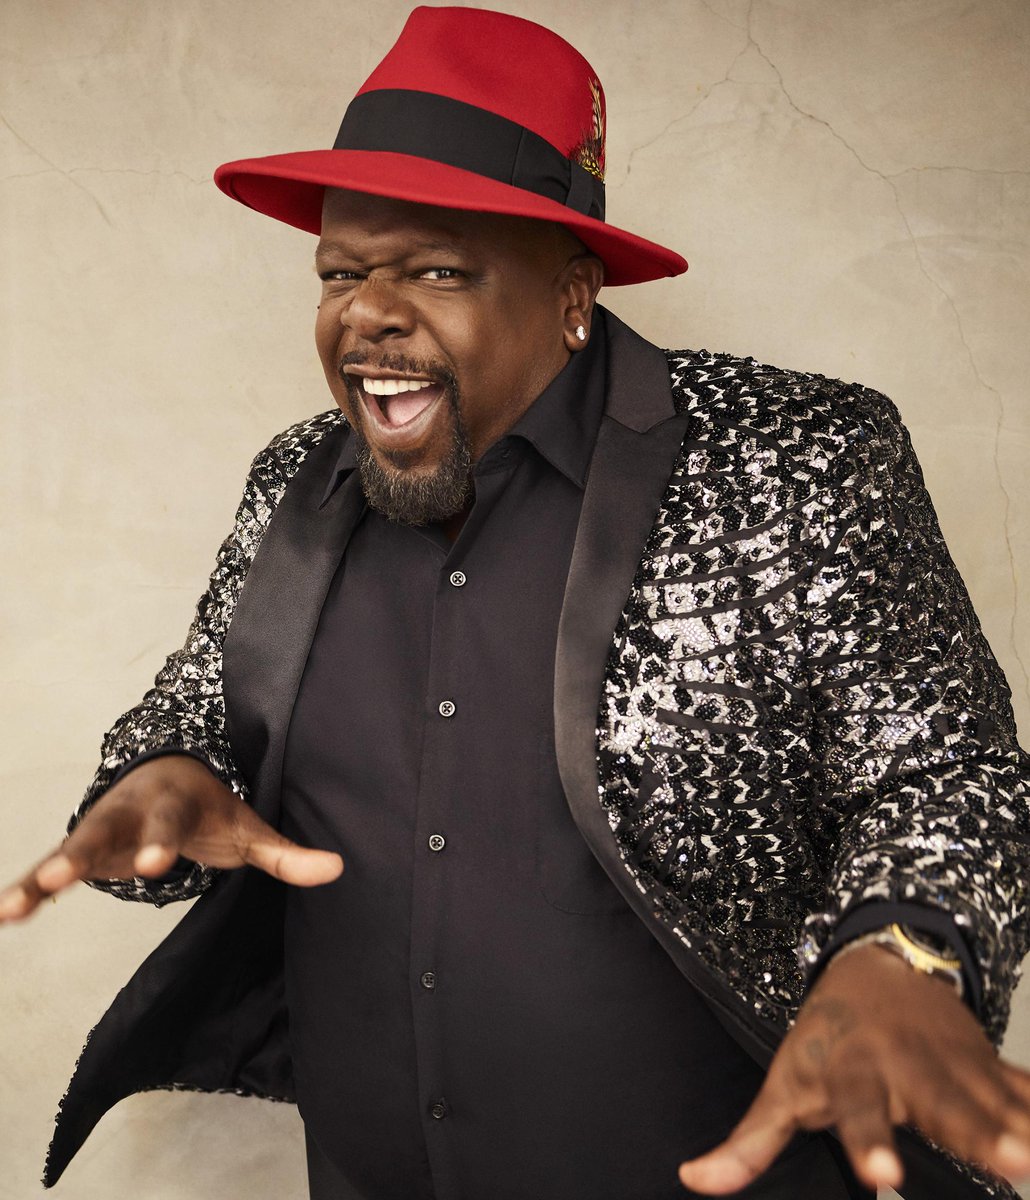 Hosted by The Neighborhood star, @CedricTheEntertainer, The Greatest @ Home Videos is a series that showcases the creativity, humor and humanity from the next generation of #athomevideos. Learn more here: bit.ly/athomevideos